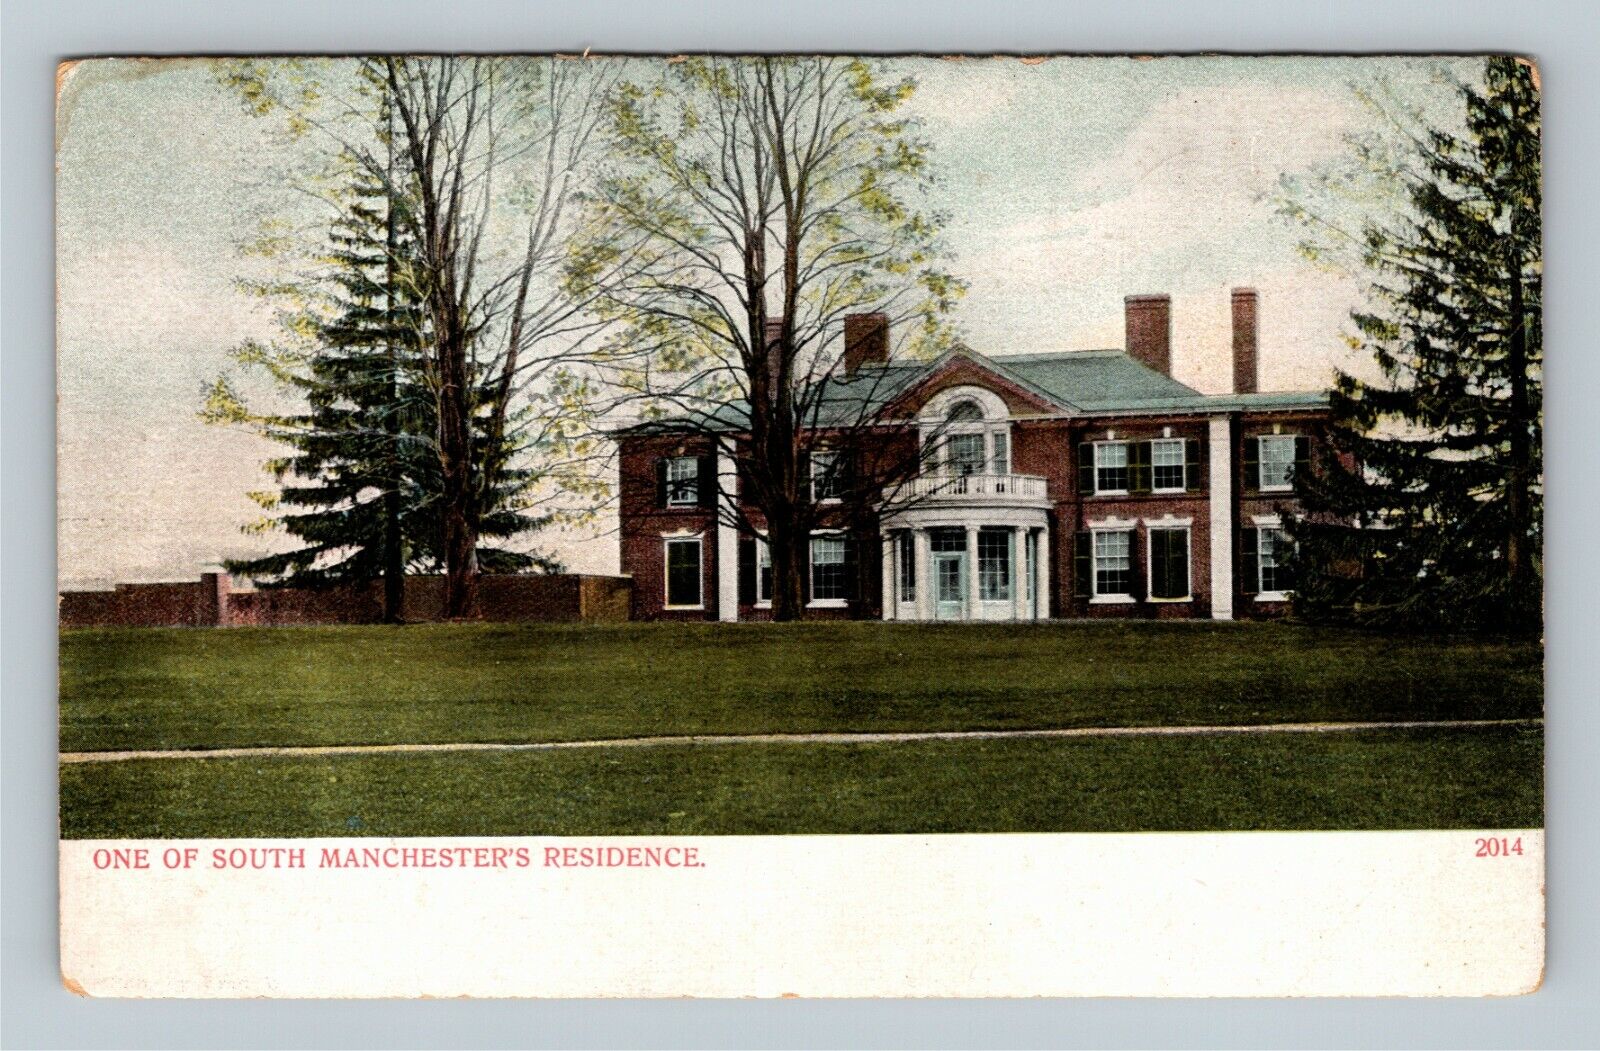 South Manchester MA Residence, Mansion, Grounds, Massachusetts Vintage Postcard